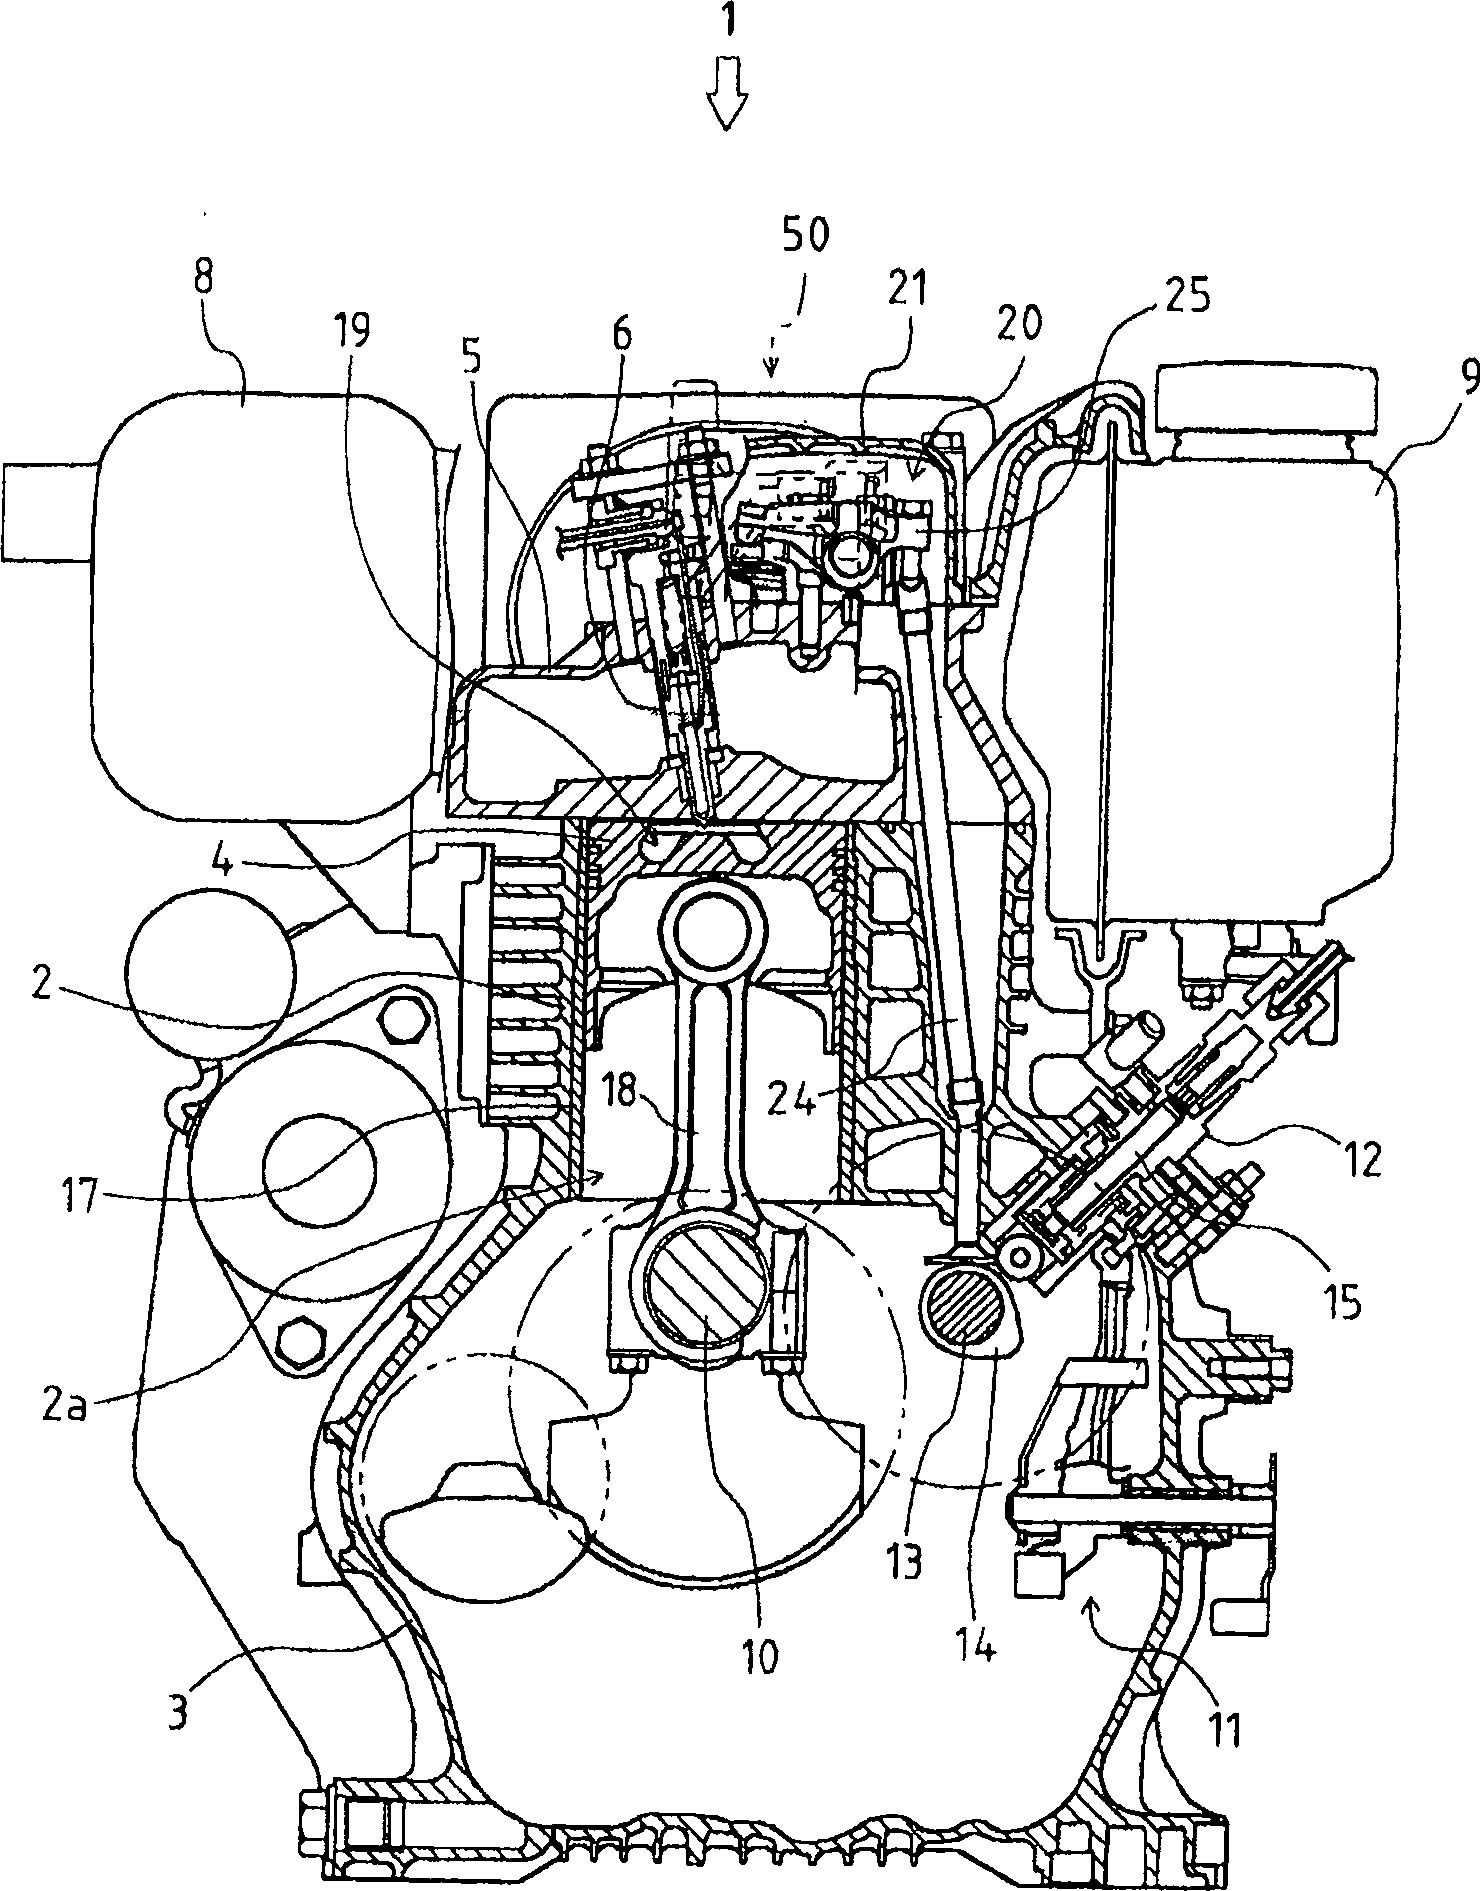 Superstructure of engine